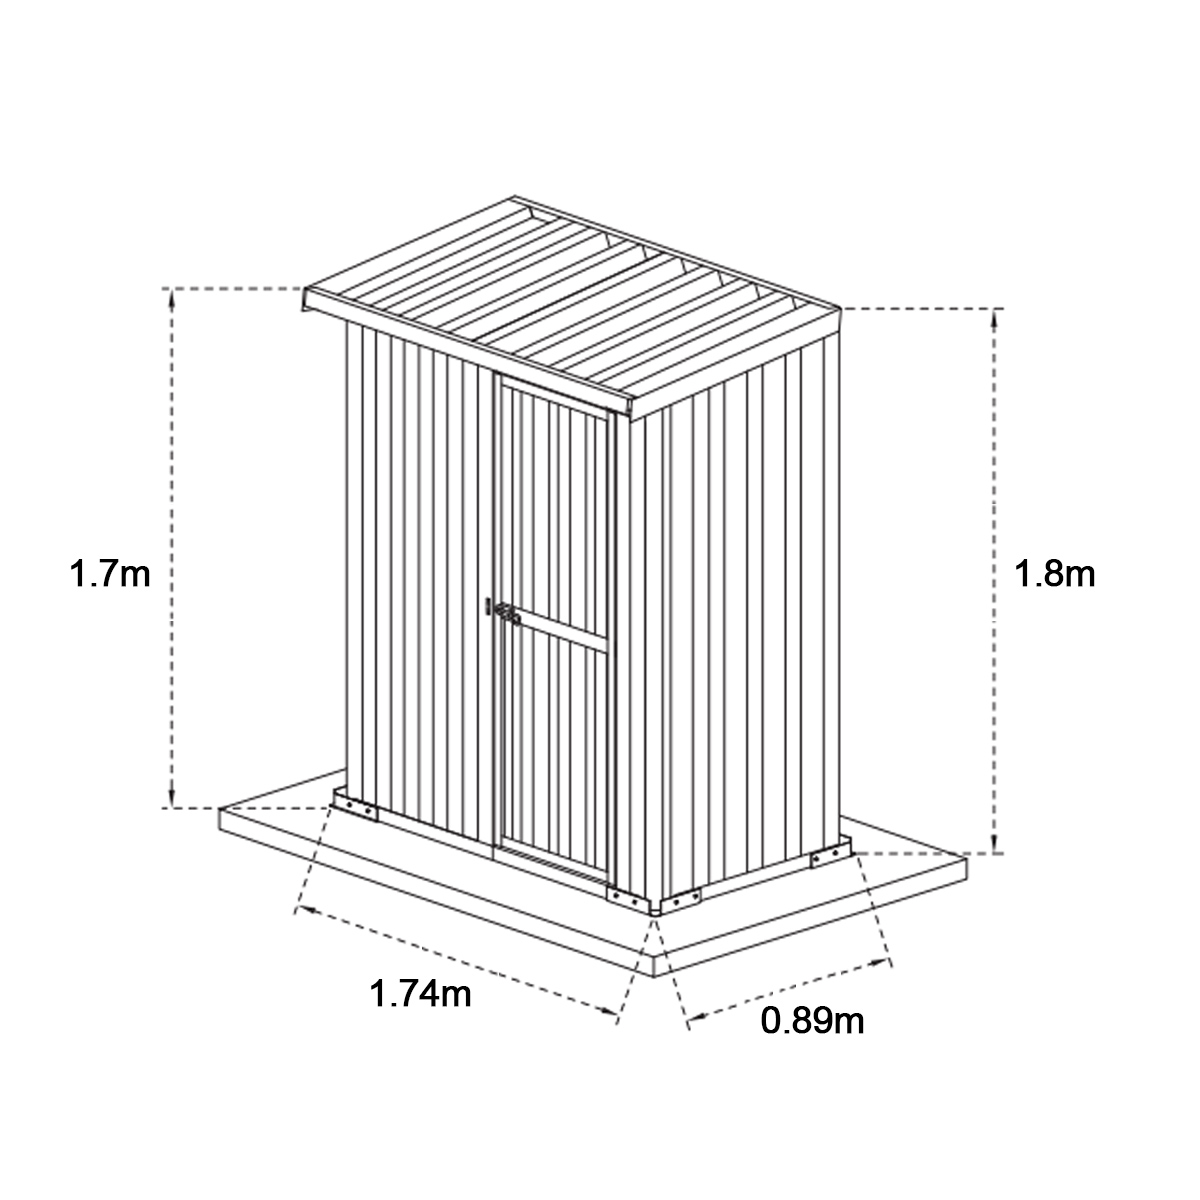 Garden Storage Shed 1.75 x 0.9m Tools Mini Budget Excel 